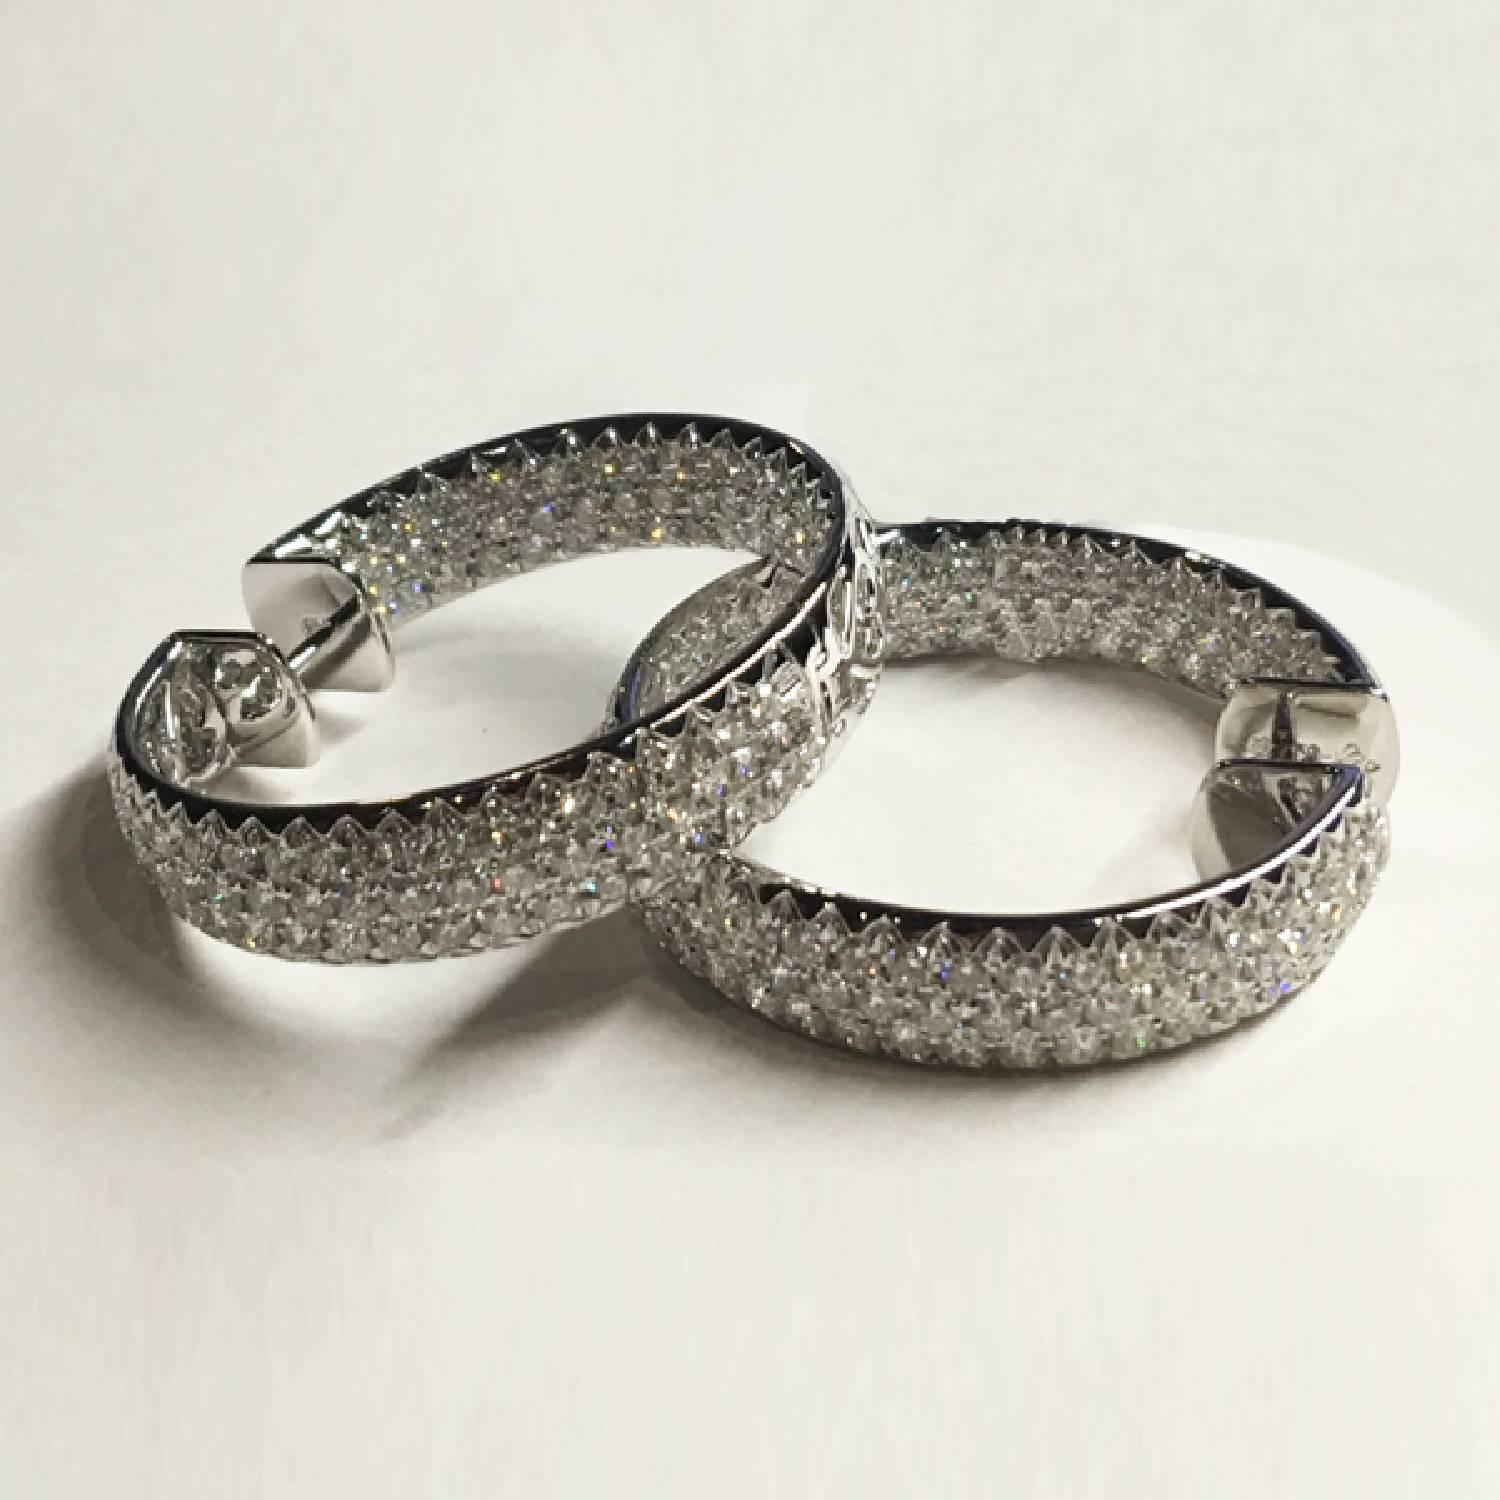 18k Hoop Earrings containing 8.07 carats of pave set F-G color VS+ round brilliant diamonds.